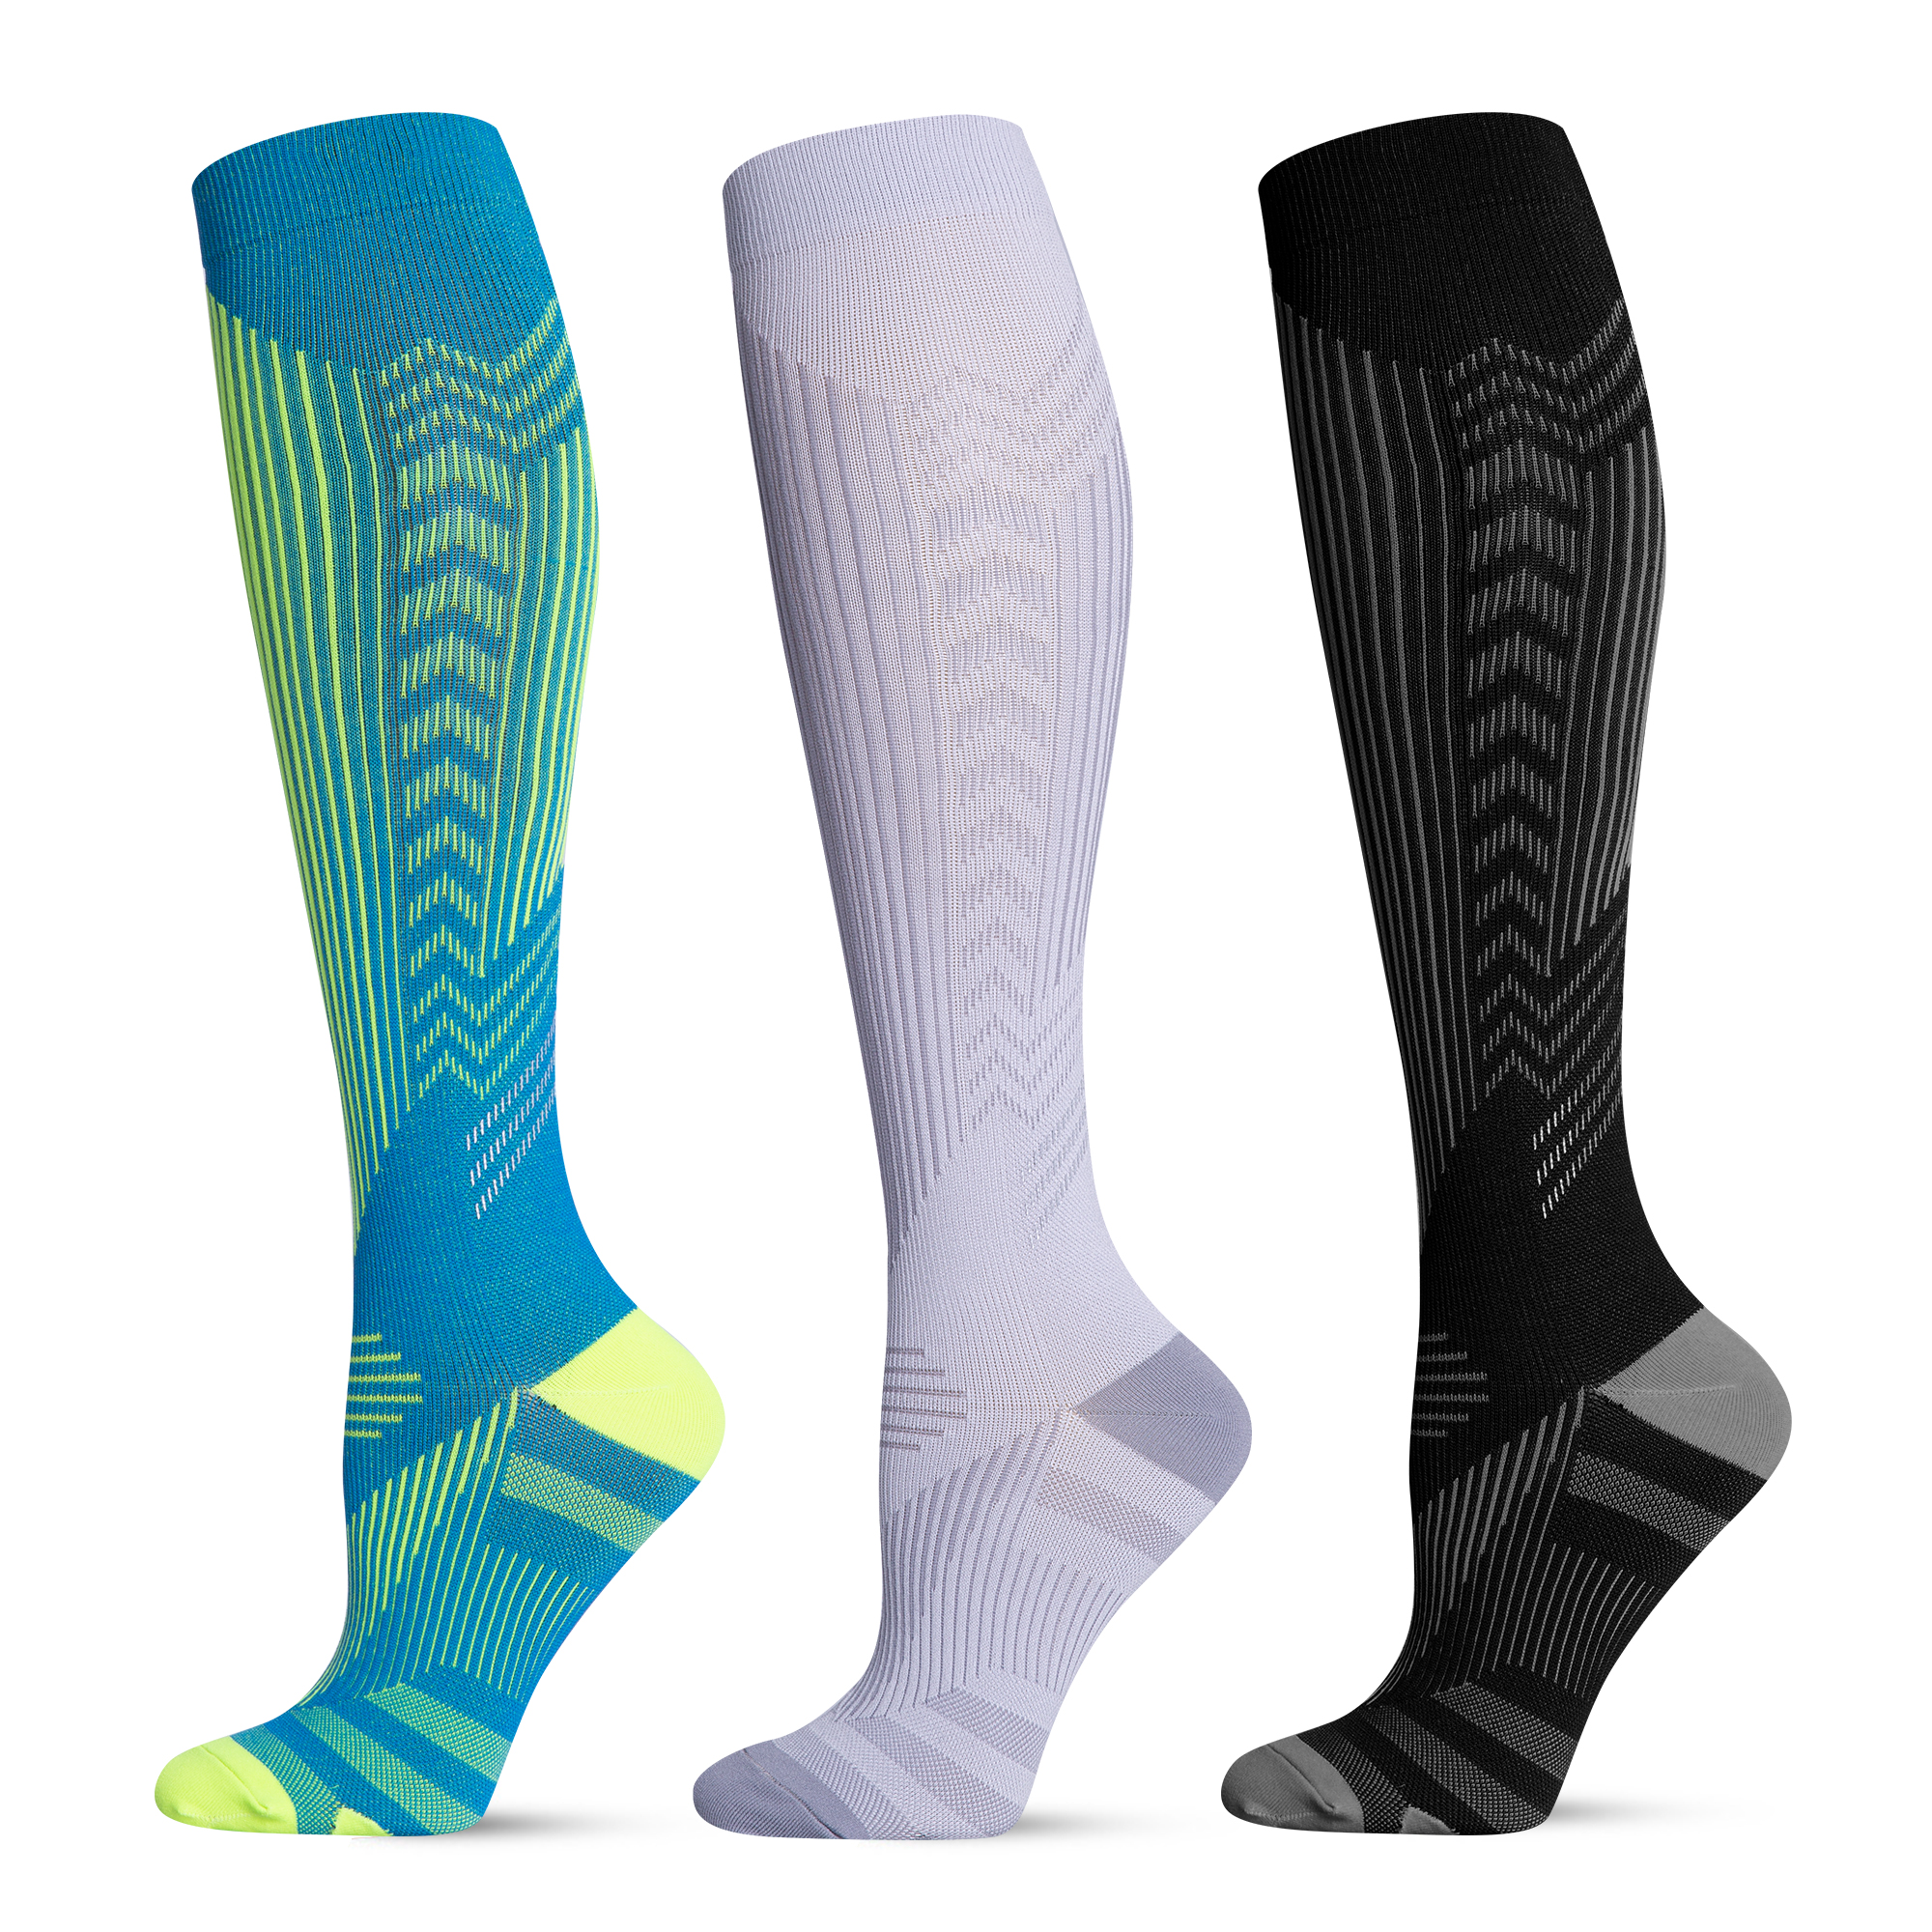 Hot sale Factory Badminton Socks - Compression Socks 360-degree Stretch for Greater Flexibility and Durability Women & Men Circulation – Best for Medical, Running, Athletic Pressure Sock...